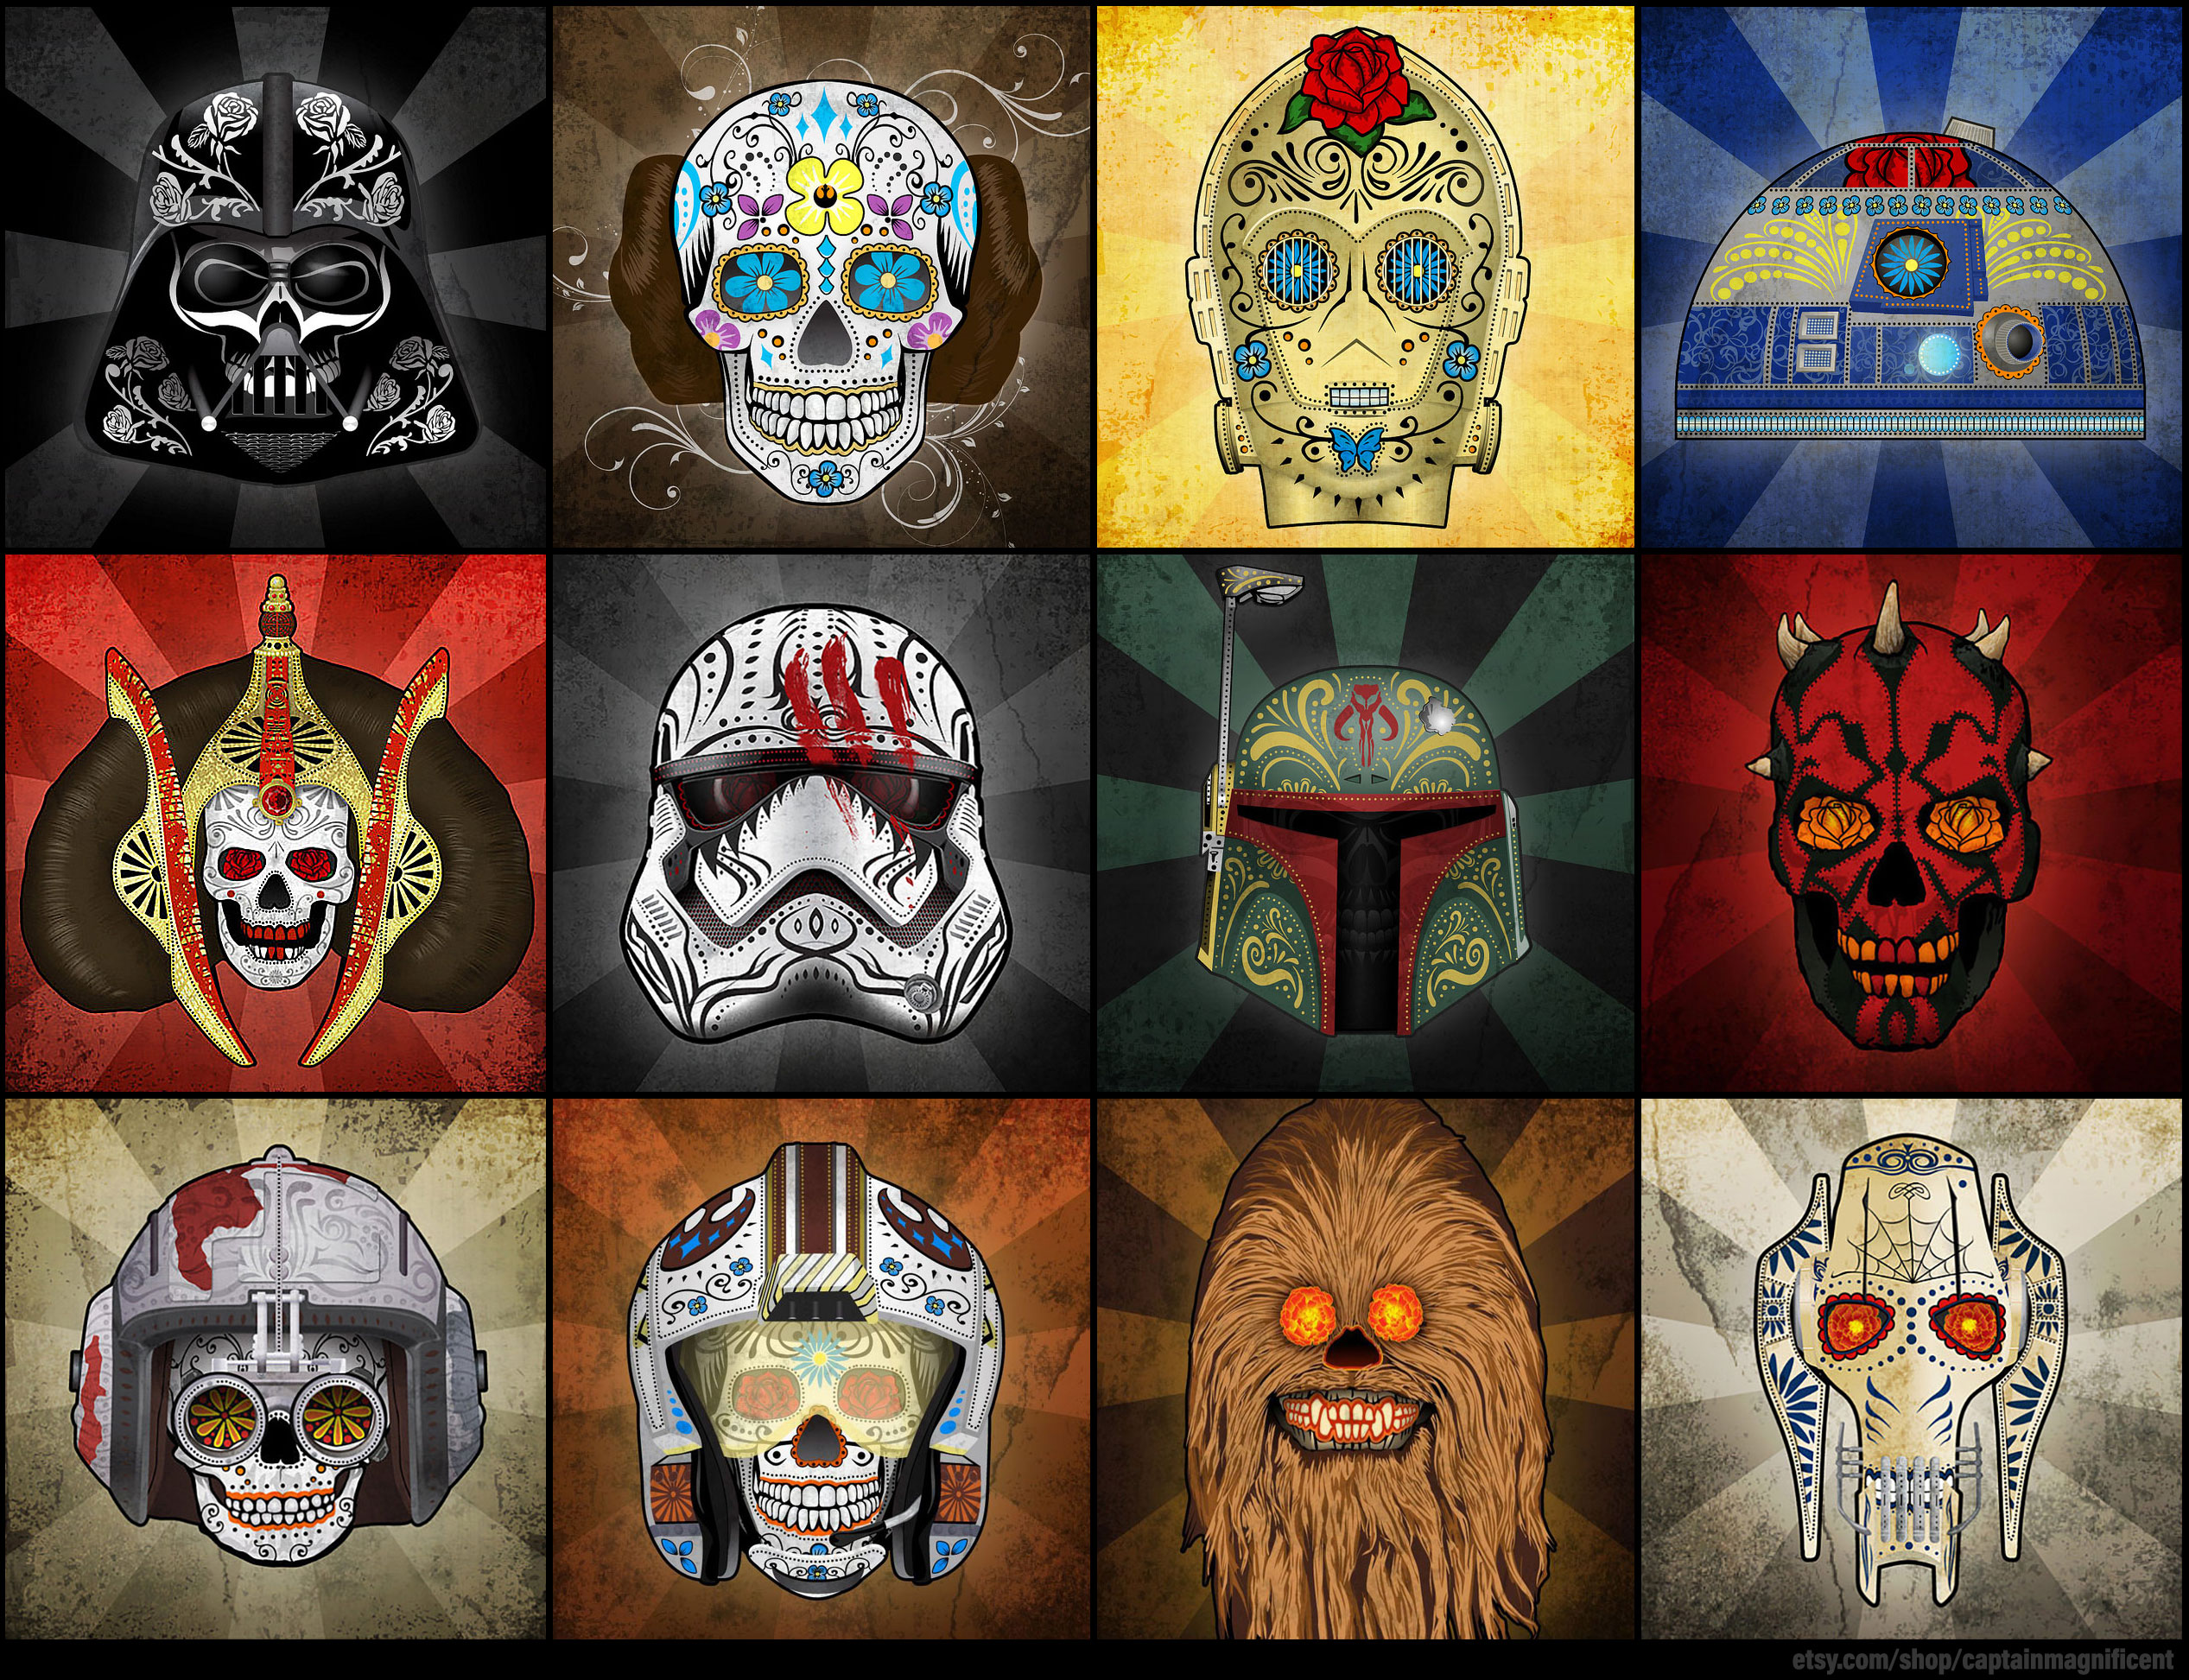 Star Wars Day of the Dead by Captain Magnificient